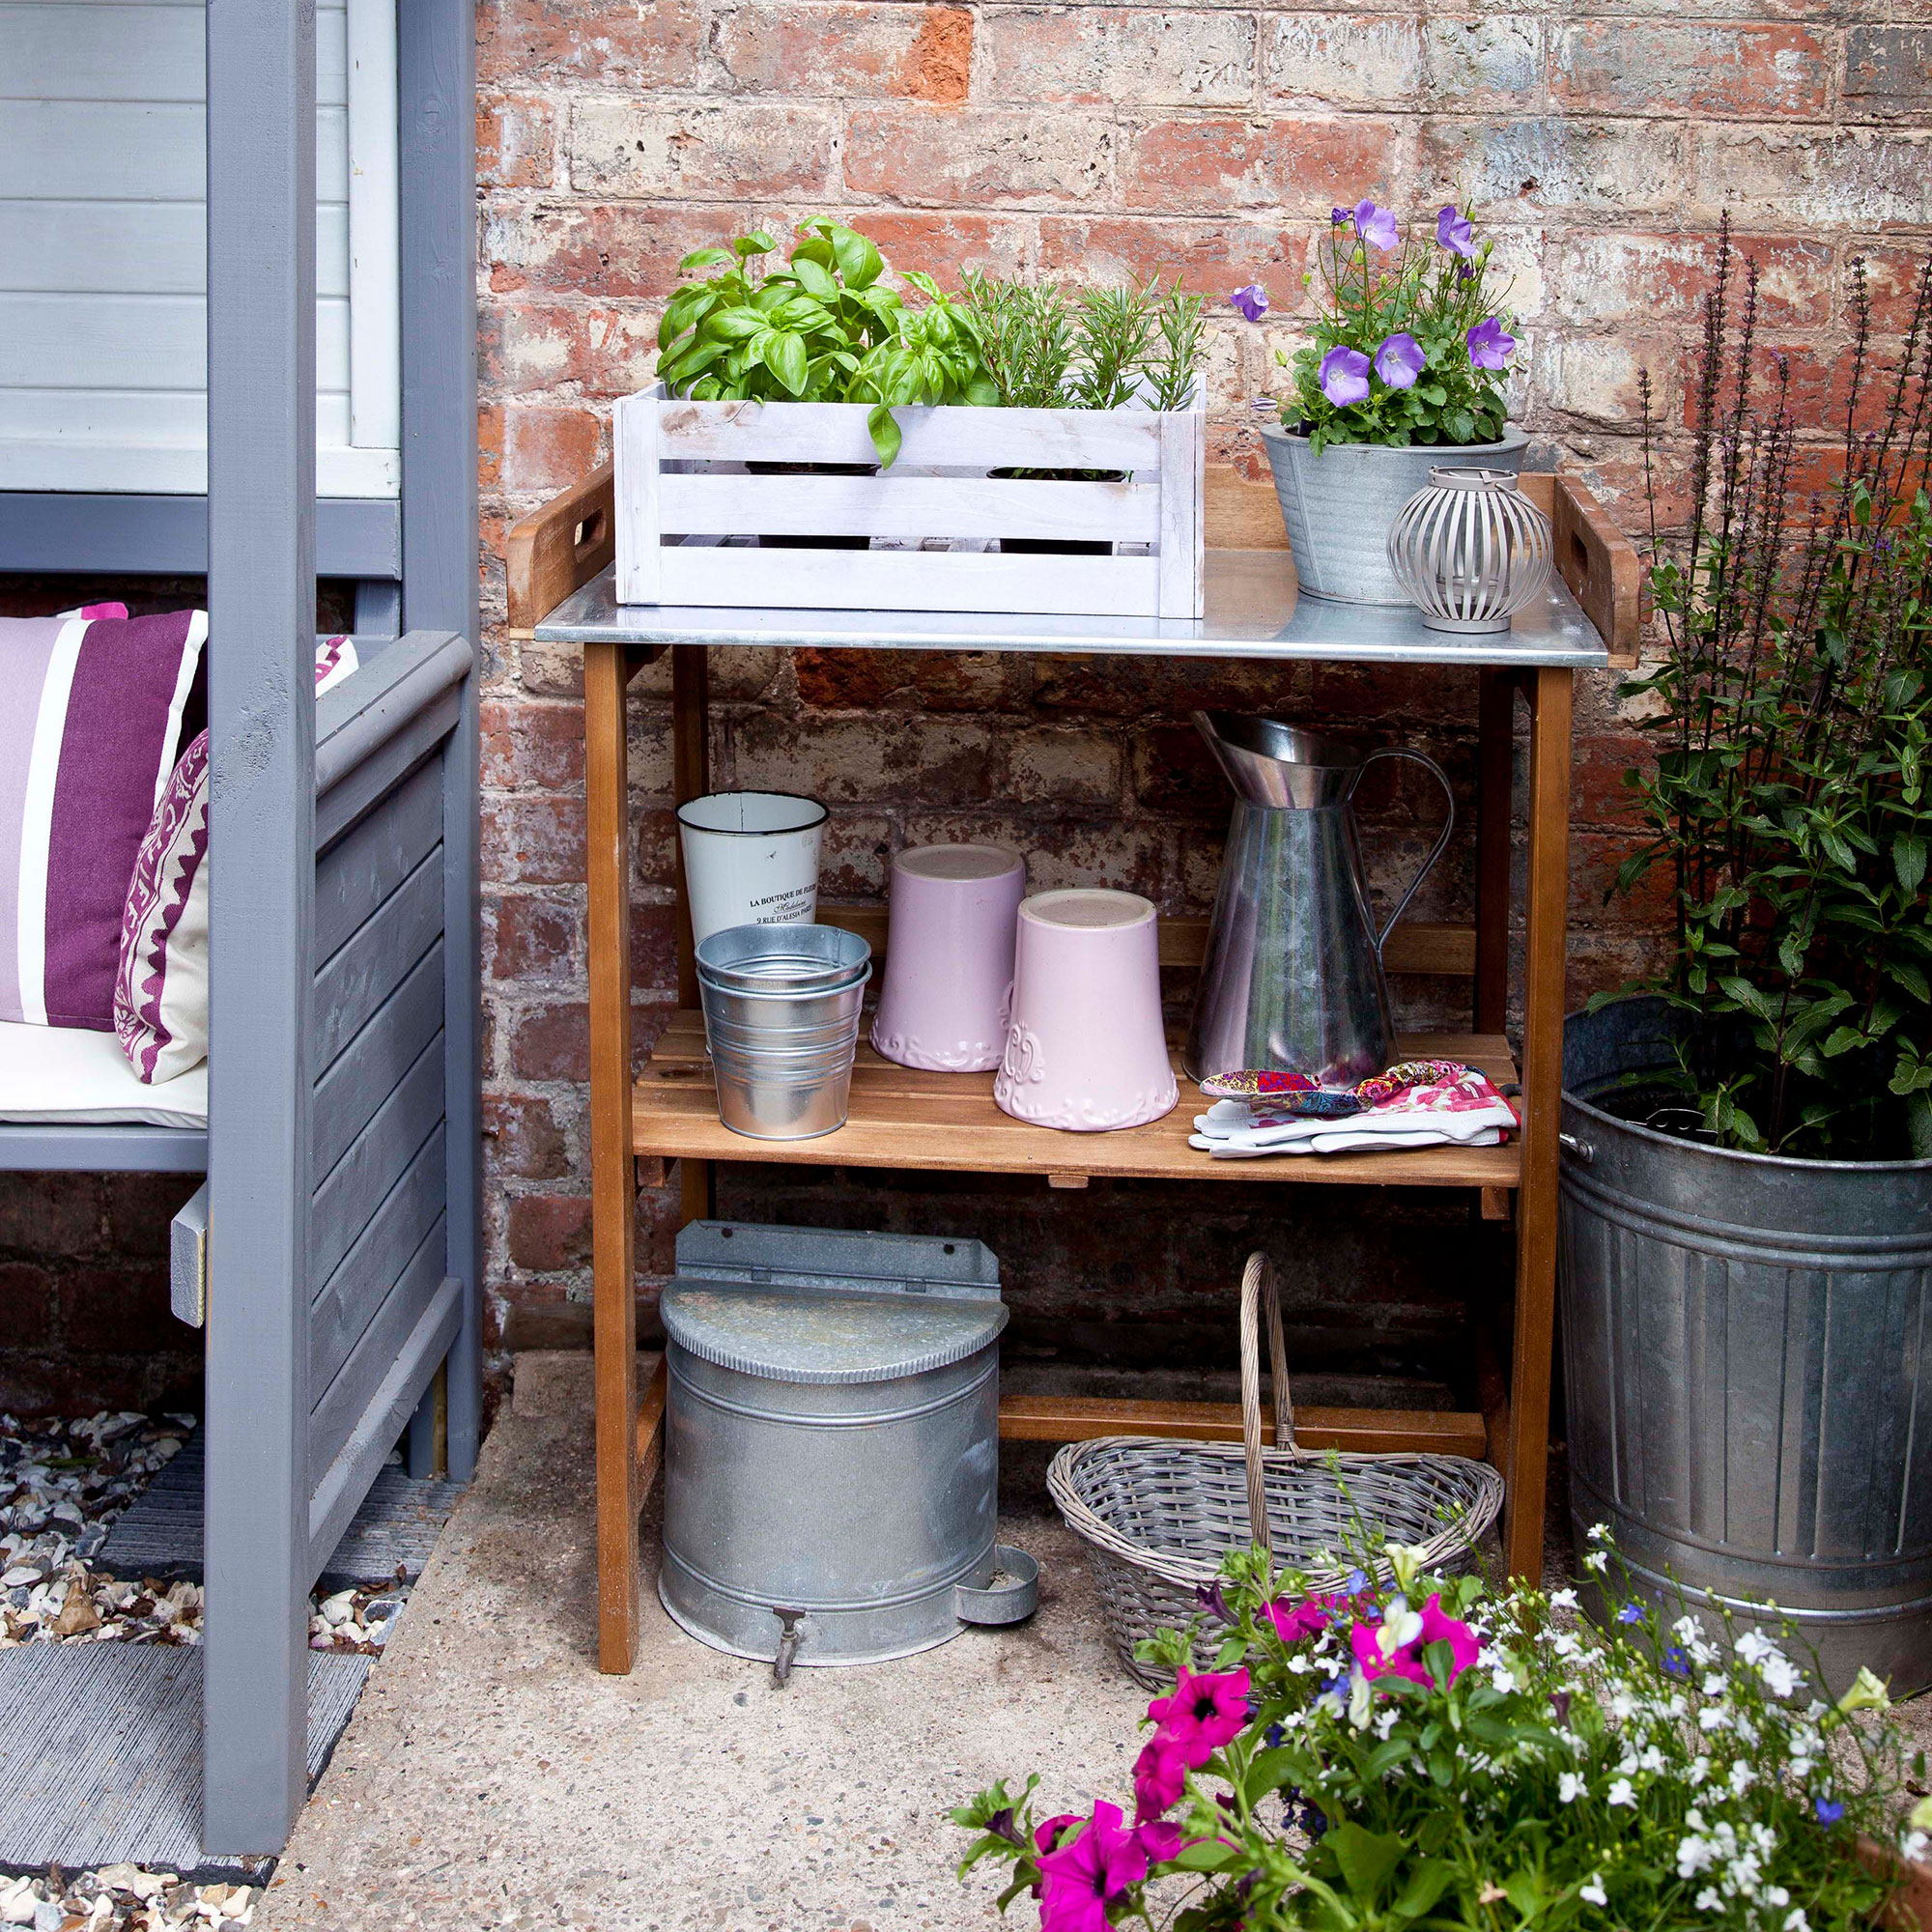 Concrete patio with potting shelving and pot